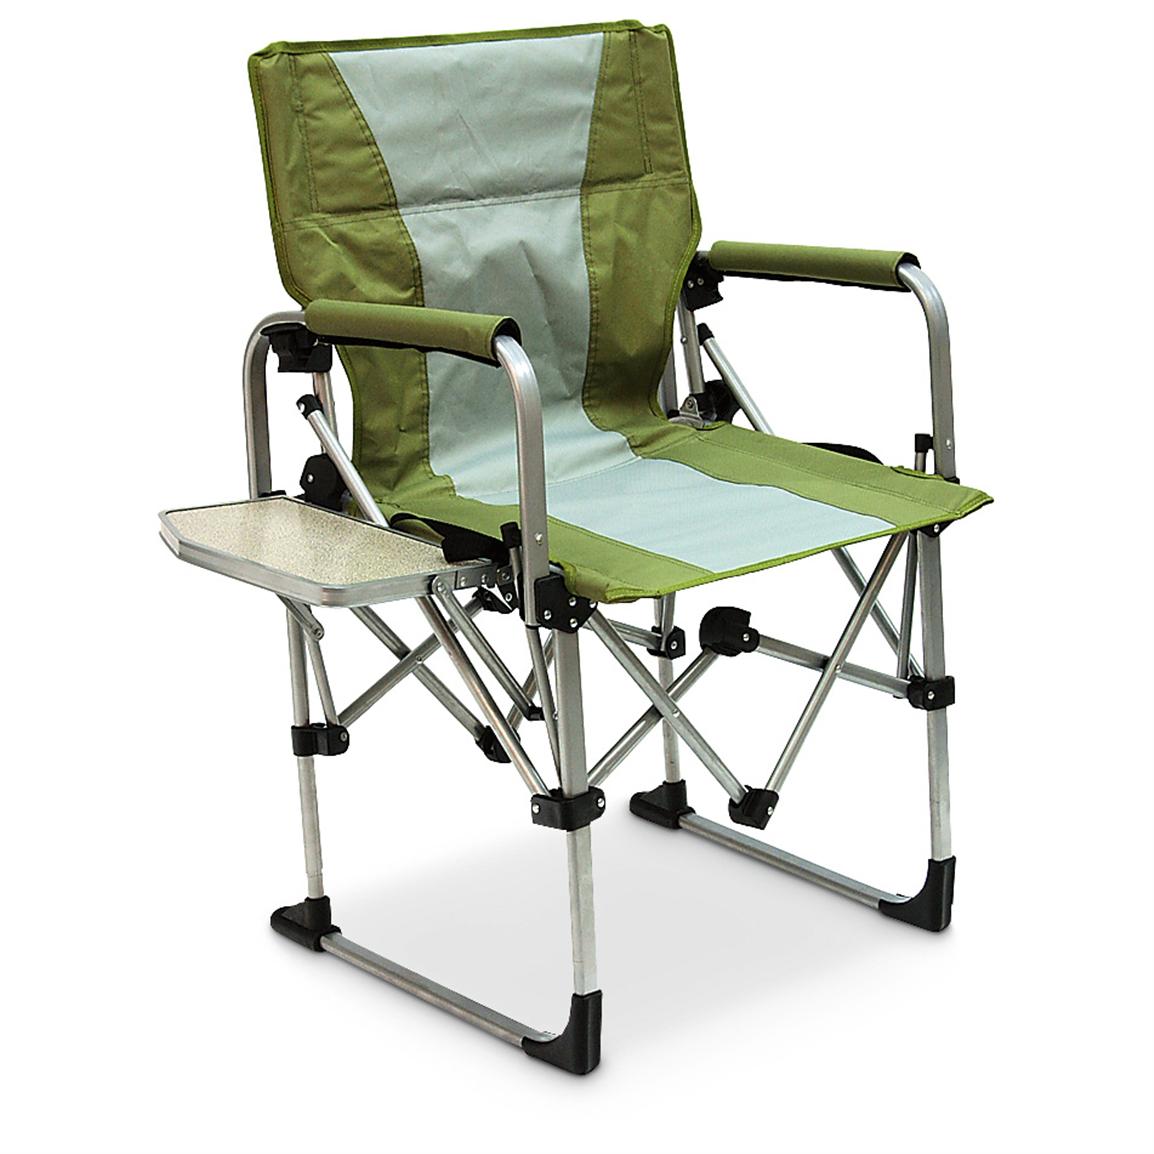 MAC Sports® Portable Director's Chair, Green - 234570, Camping Chairs